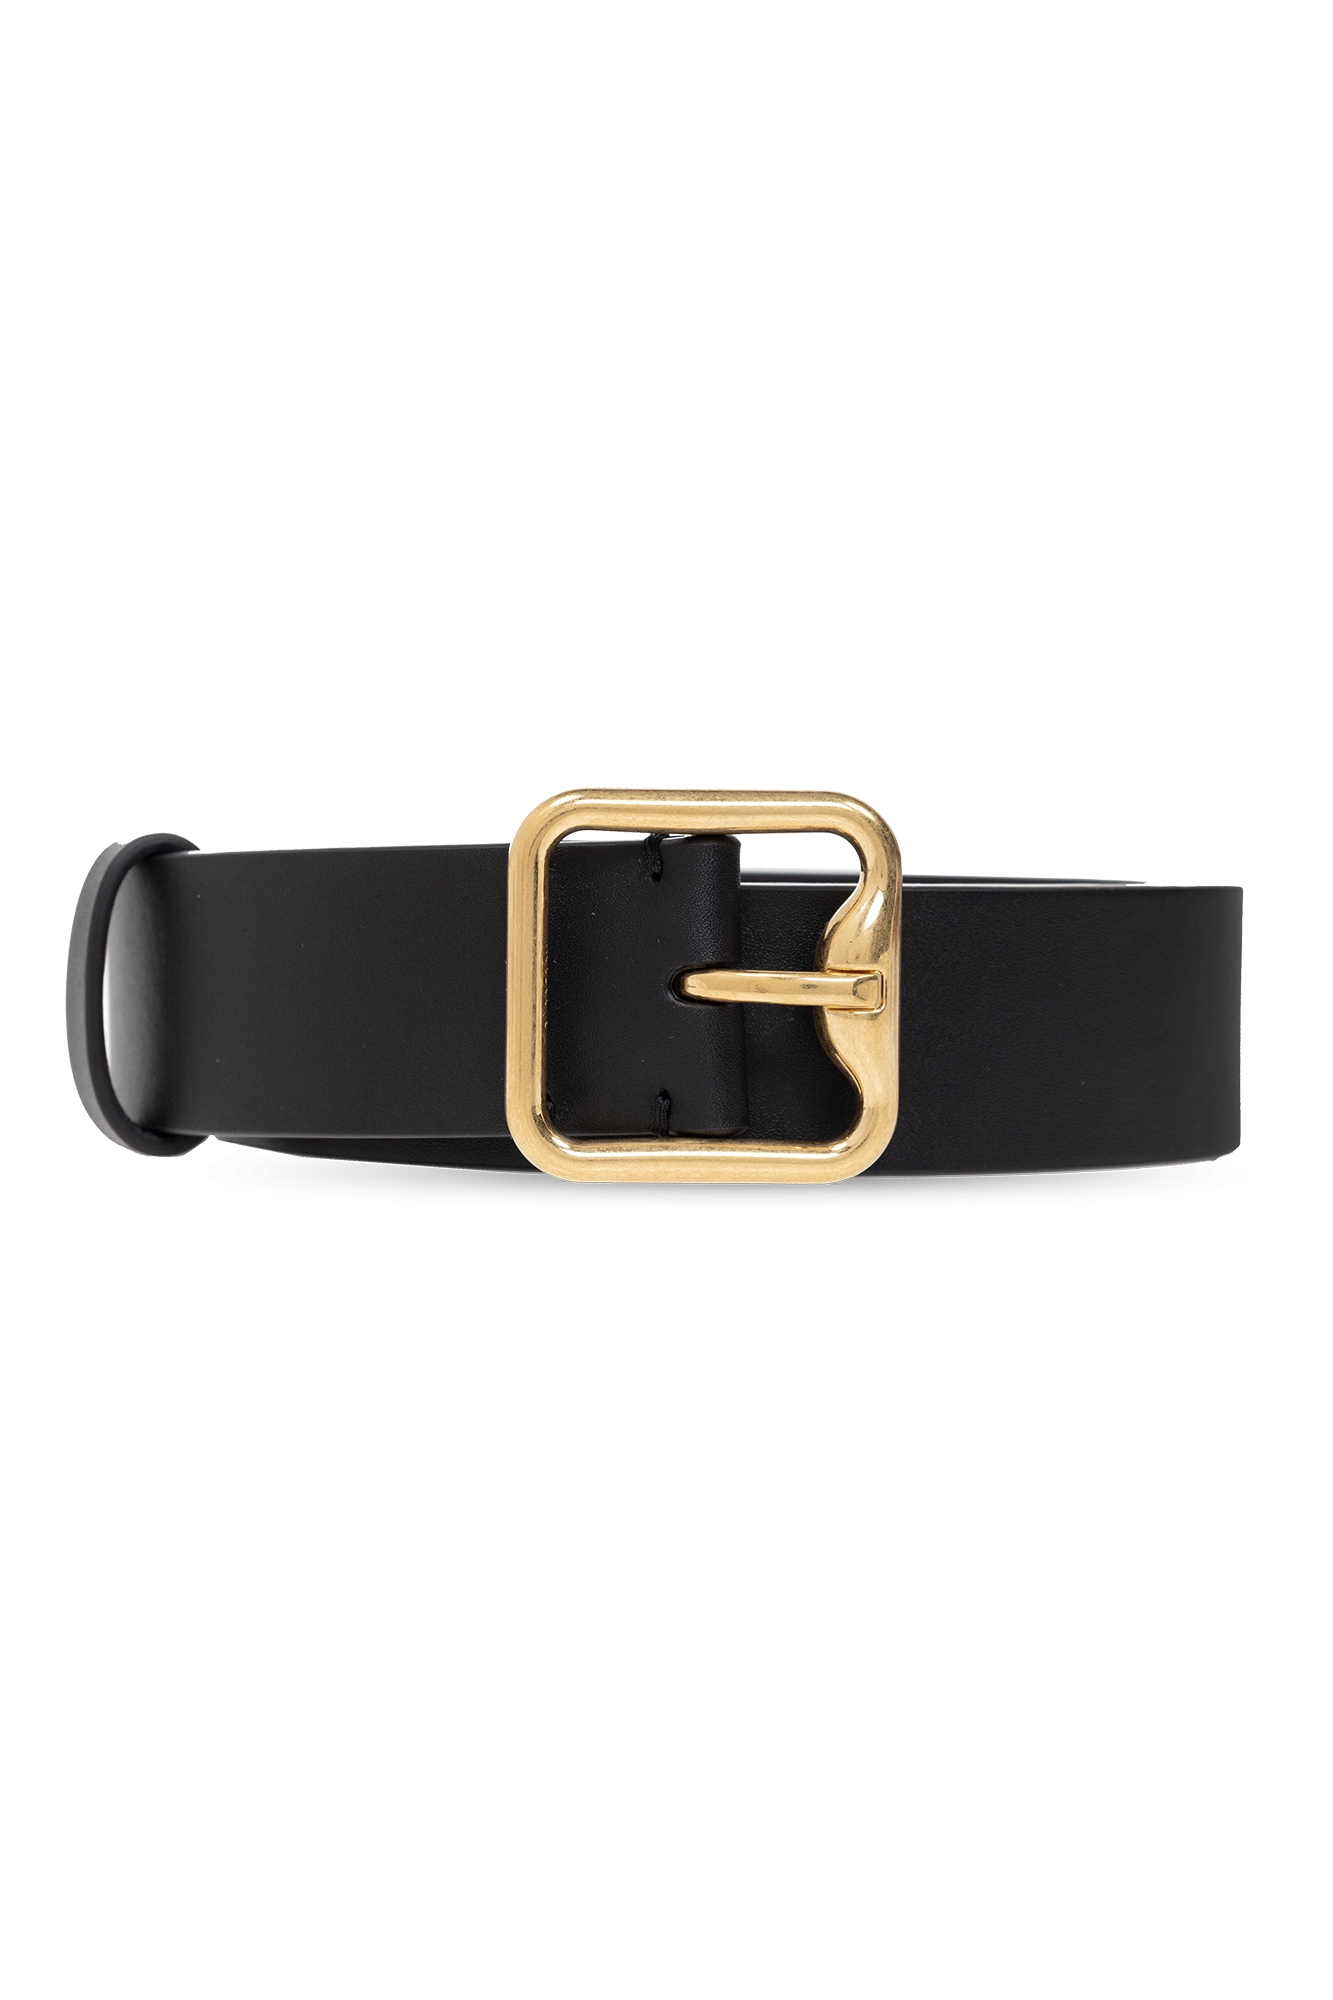 Burberry Patent Leather Belts for Women